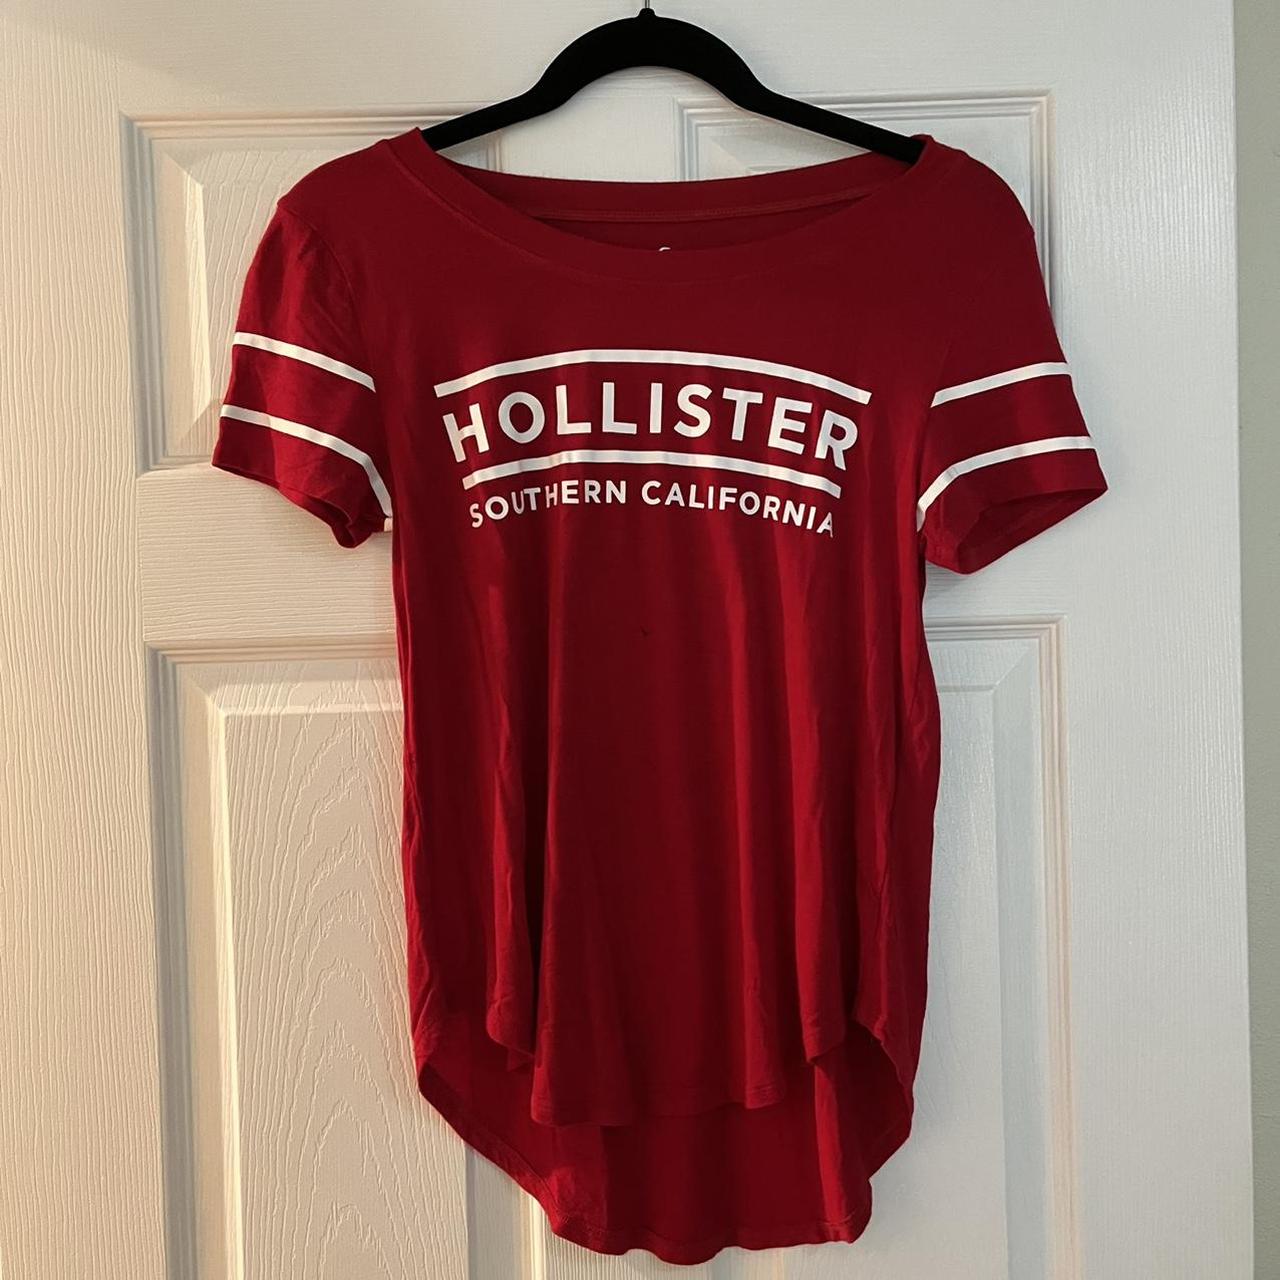 Red Hollister t-shirt. Very soft material. Logo in